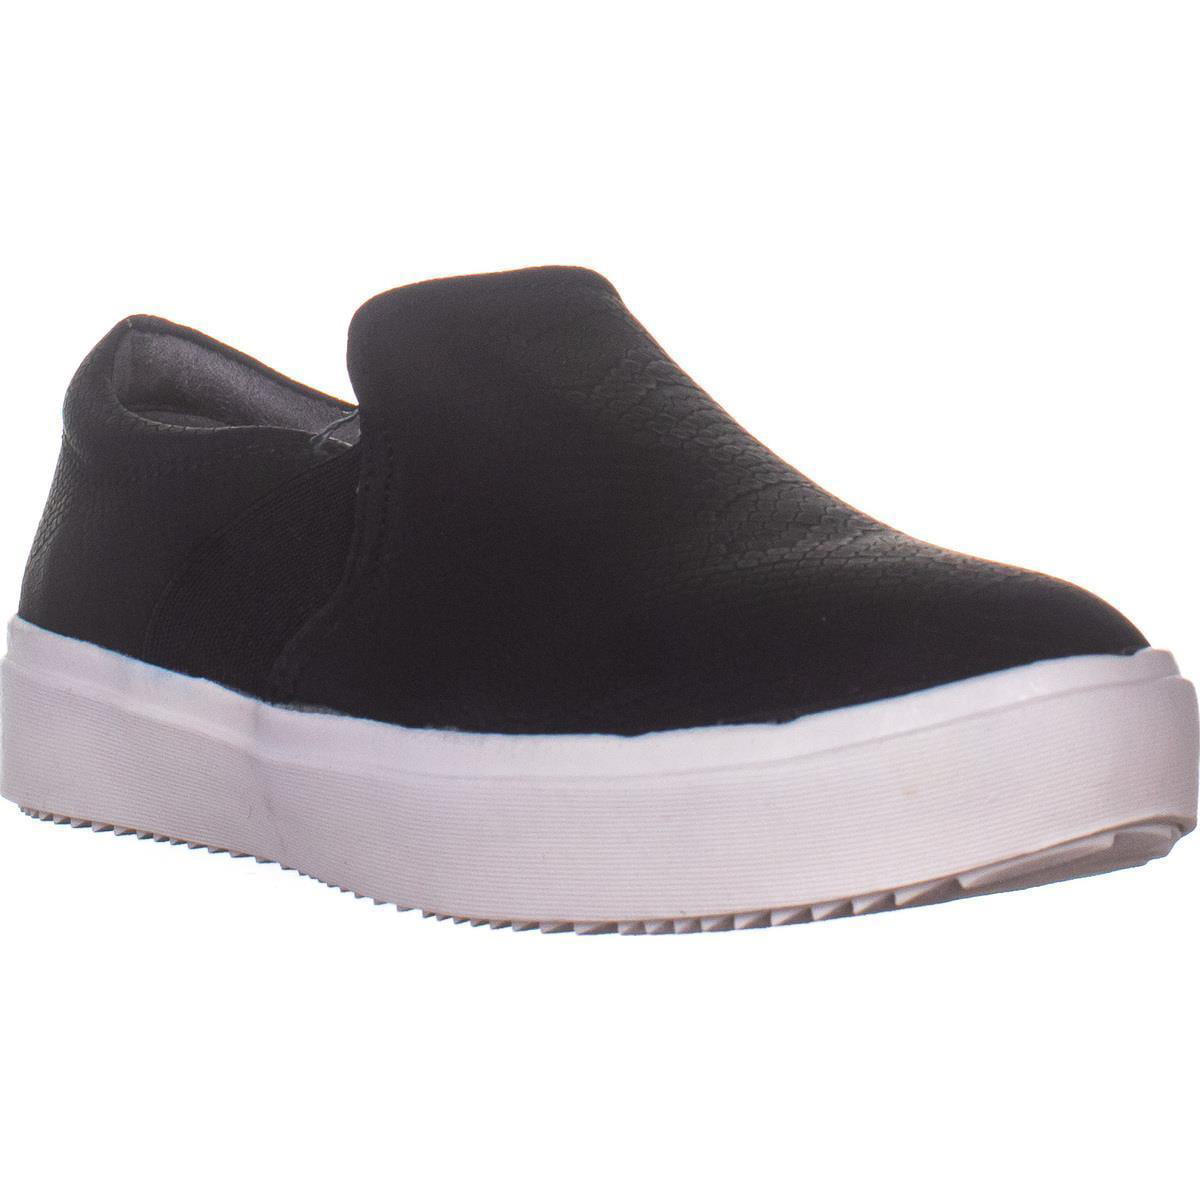 Dr. Scholl's - Womens Dr. Scholl's Wander Up Slip On Sneakers, Black ...